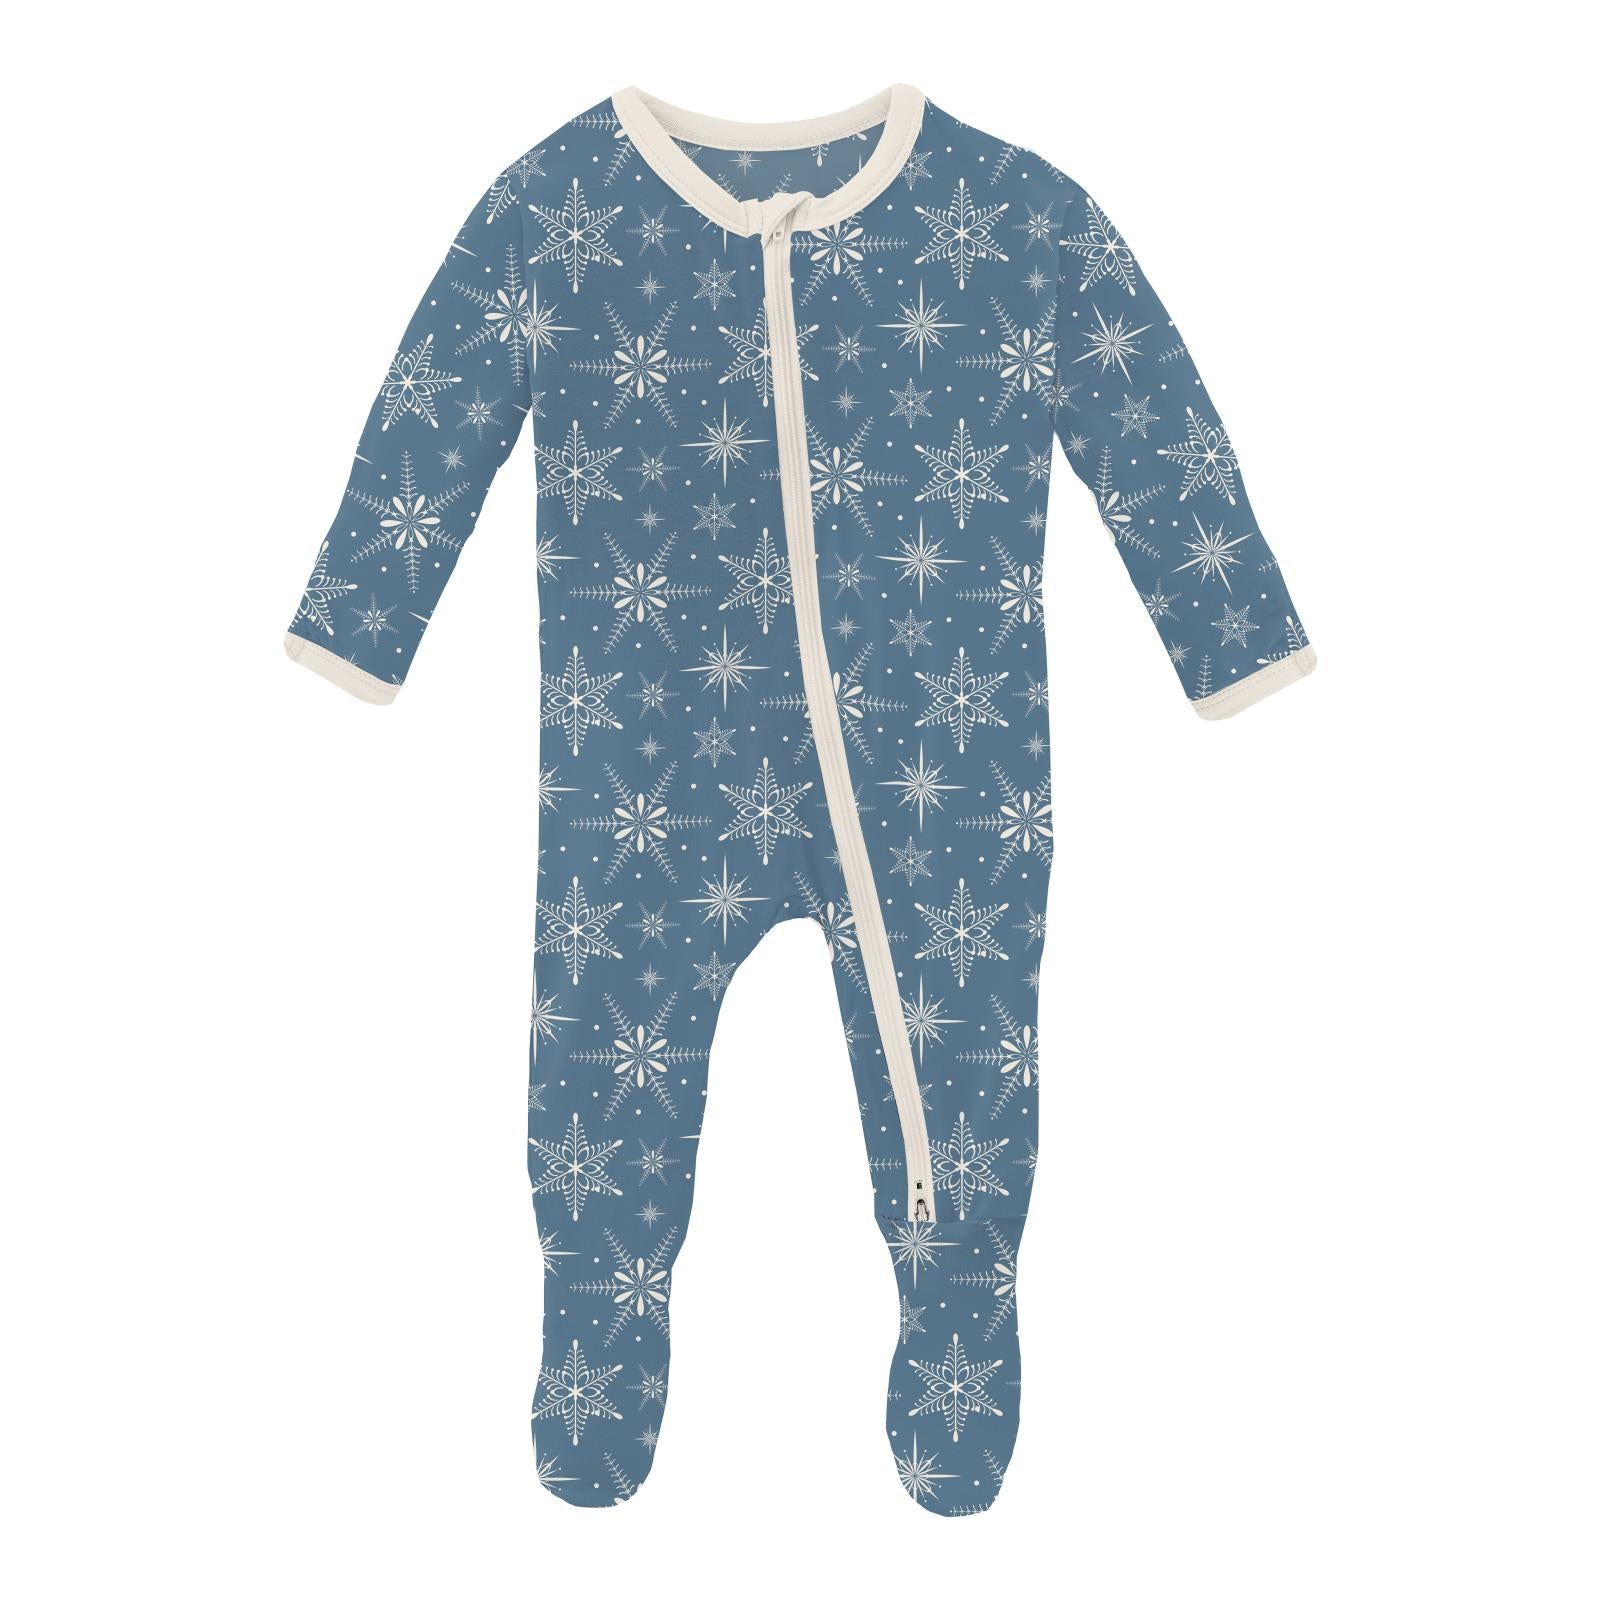 Print Footie with 2 Way Zipper in Parisian Blue Snowflakes